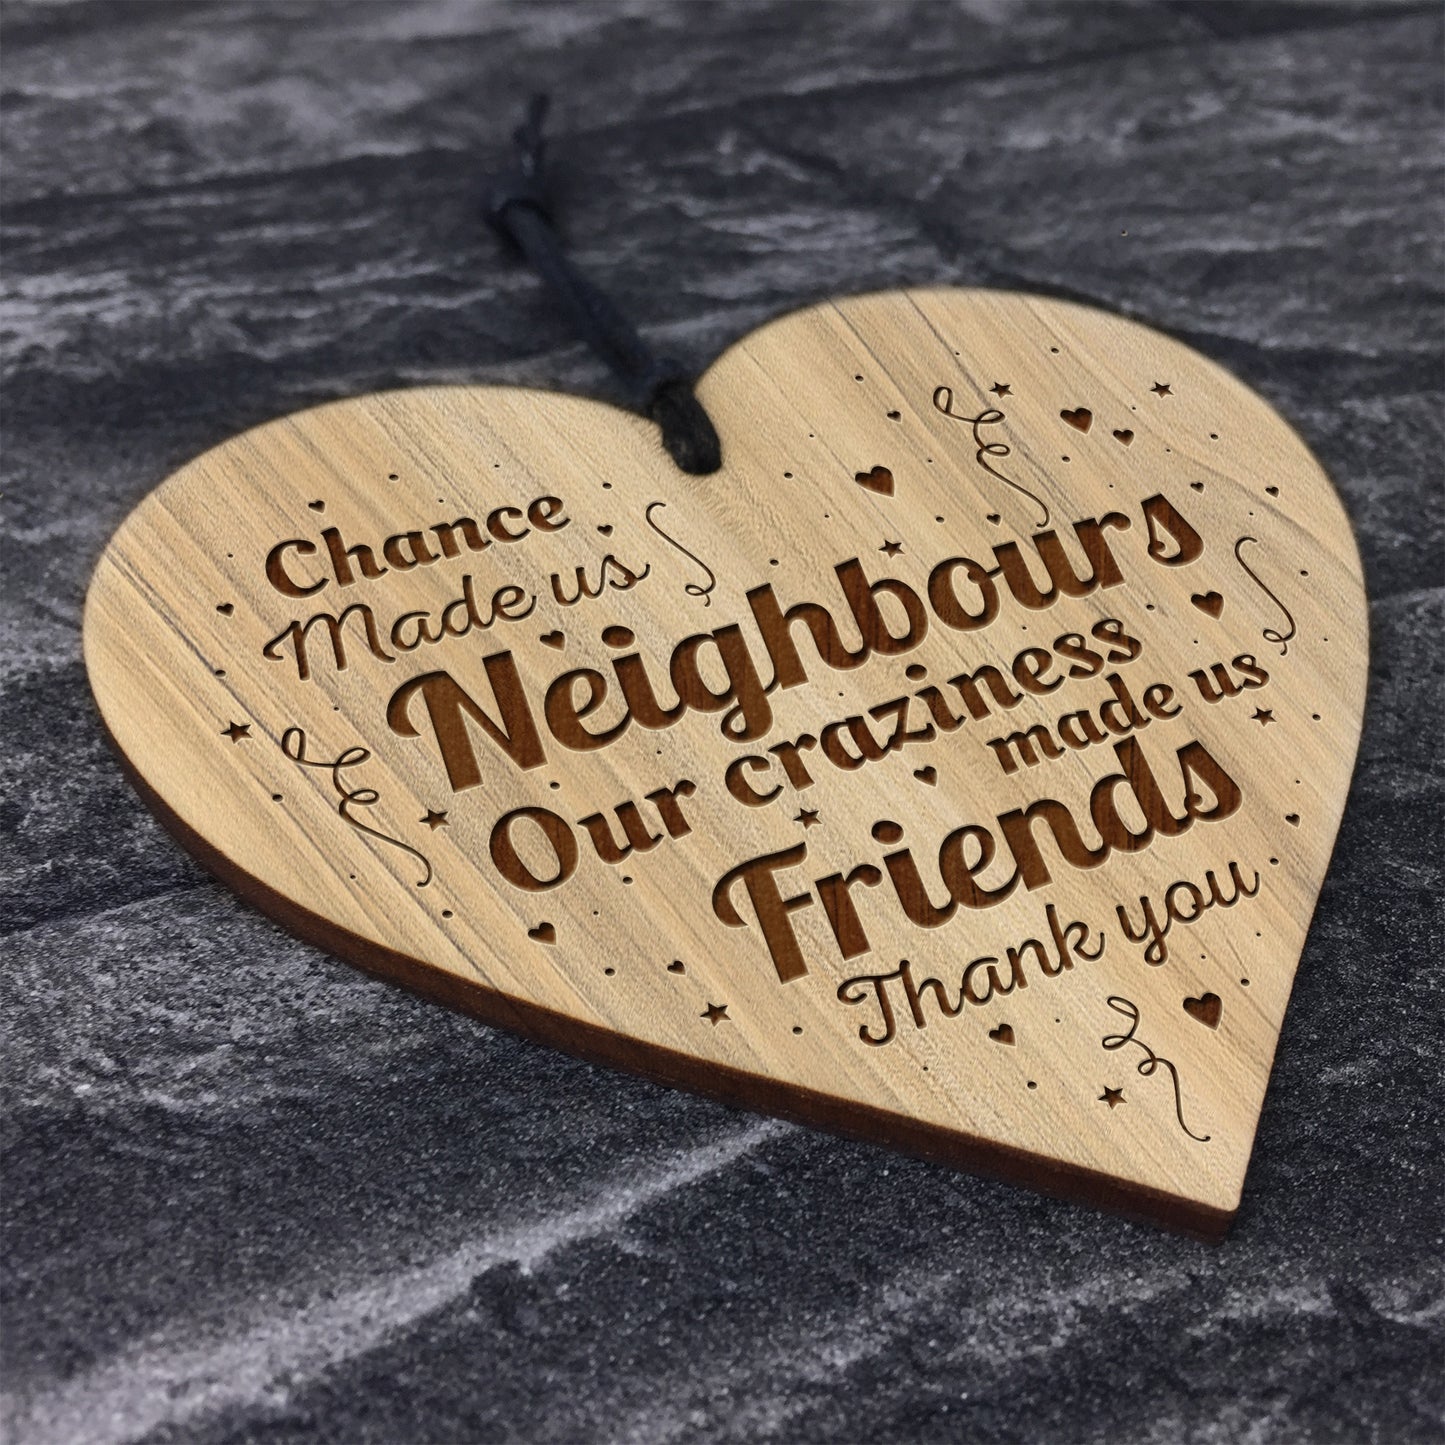 New Home Gift Friendship Sign Engraved Heart Neighbour Gift